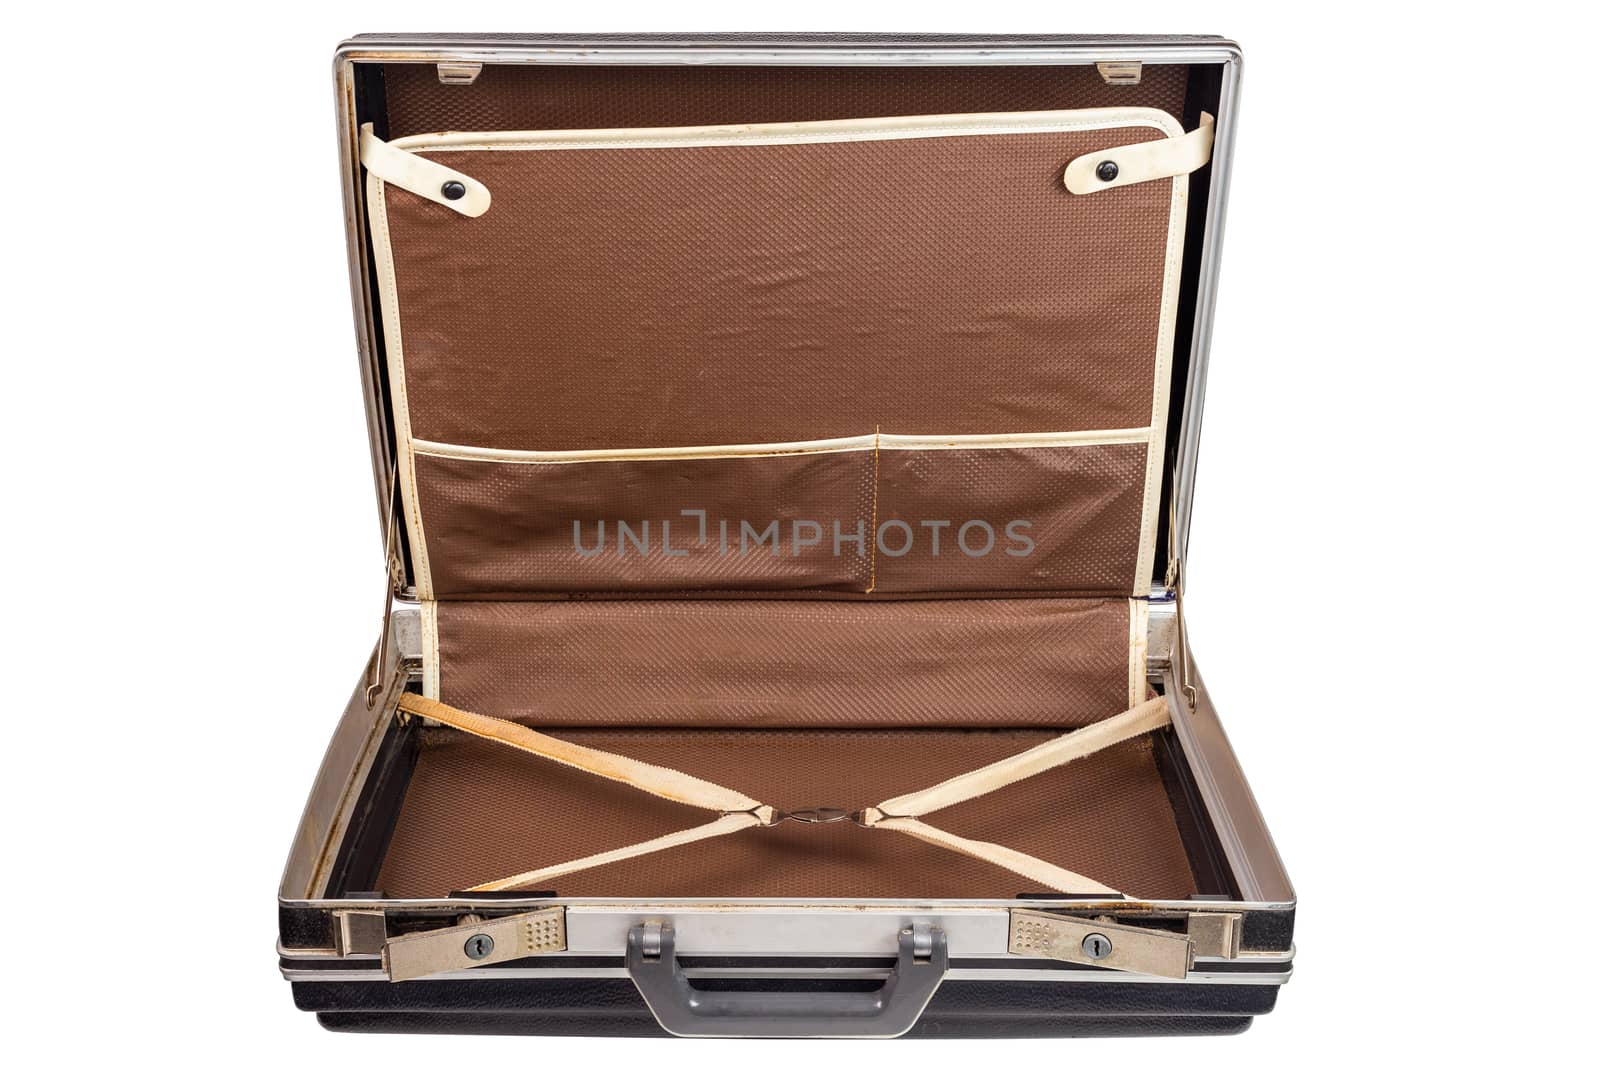 used and dirty old fashion black plastic suitcase or briefcase isolated on white background - open and lying